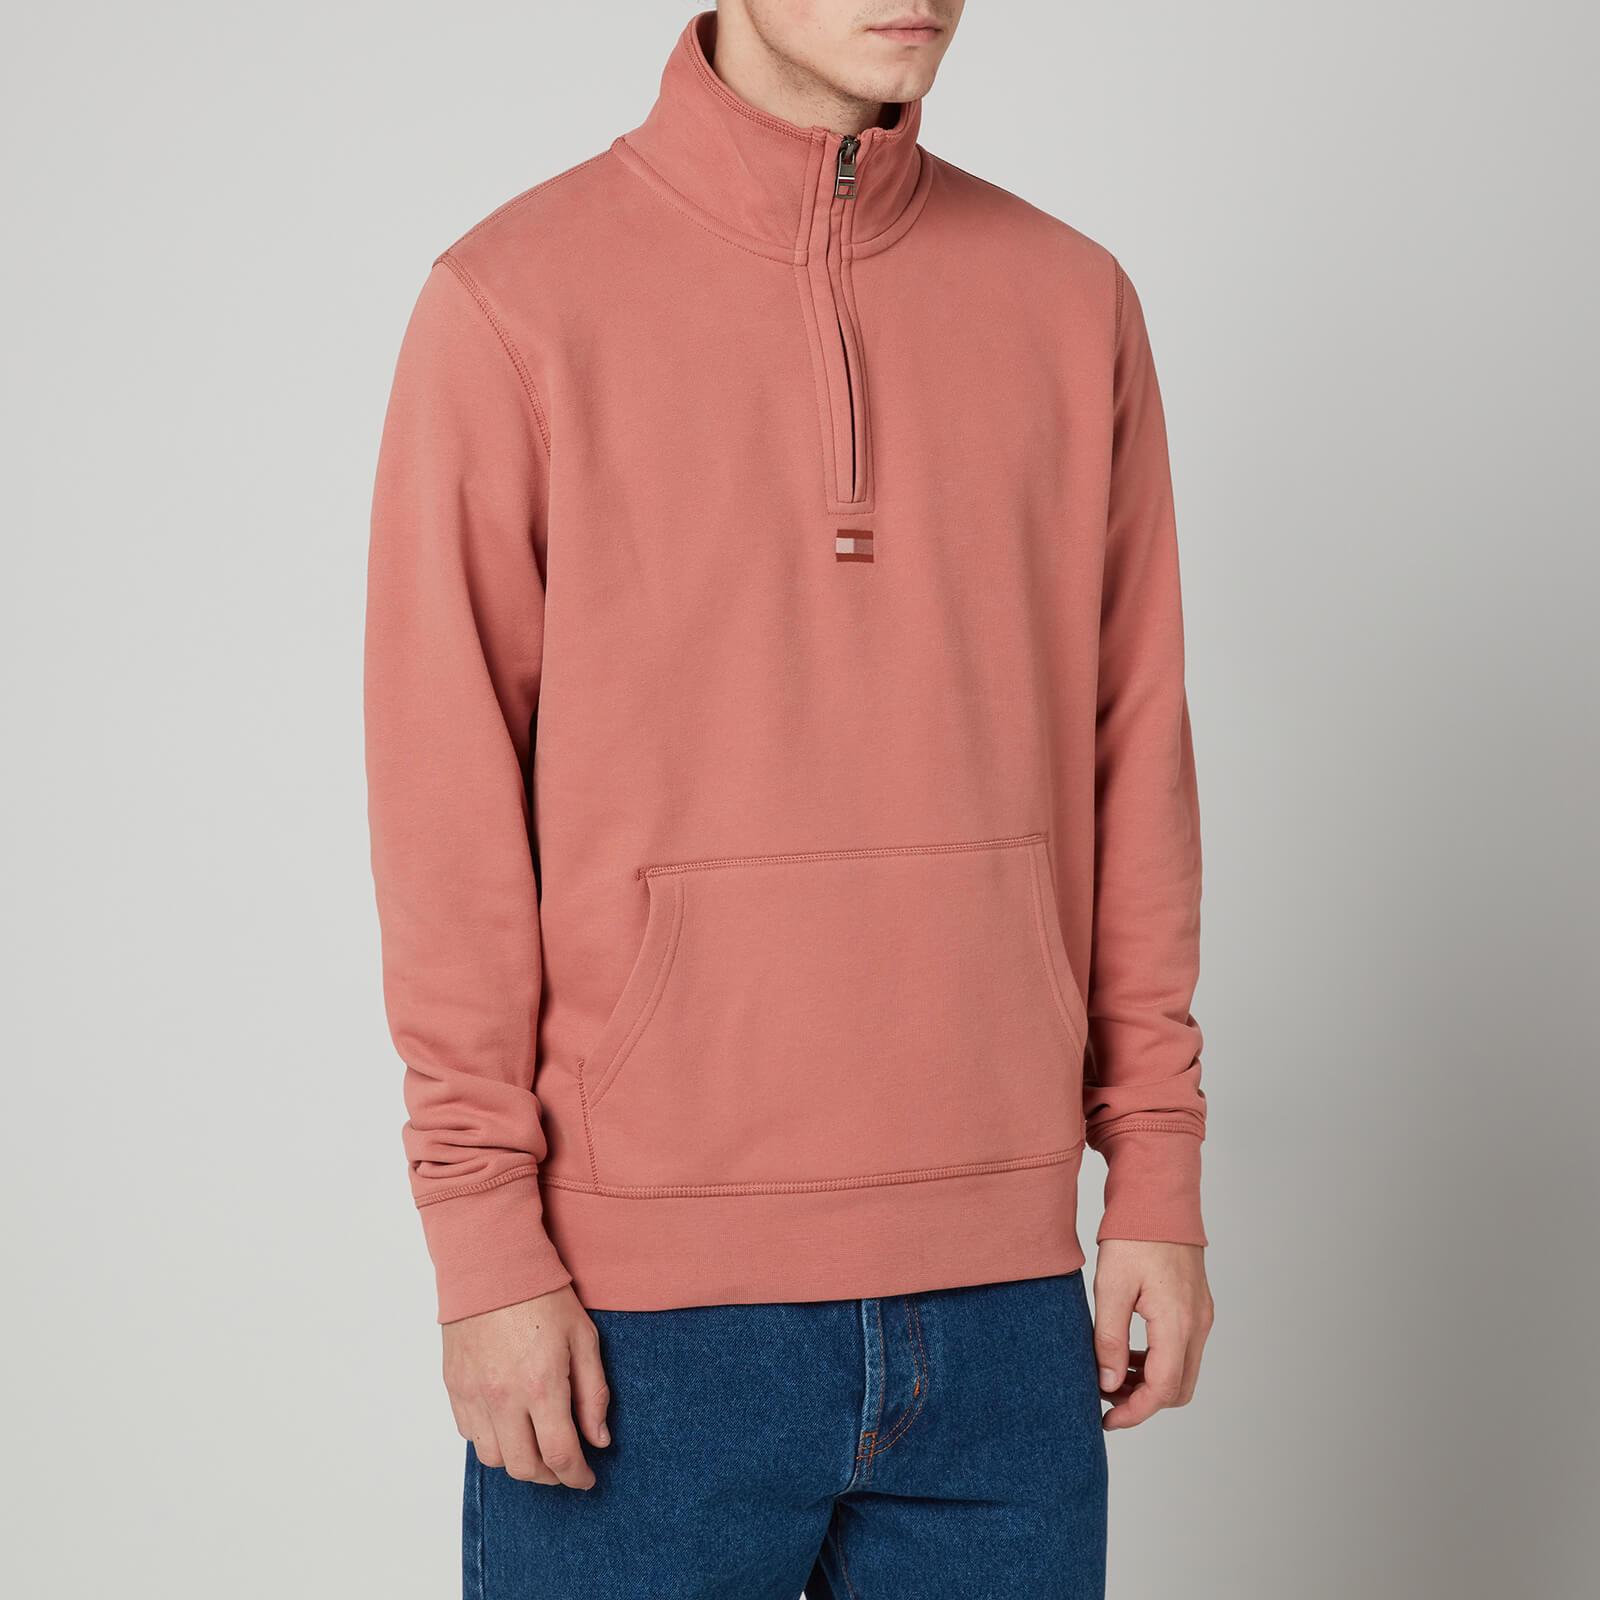 Tommy Hilfiger Recycled Cotton Mock Neck Sweatshirt in Pink for Men - Lyst